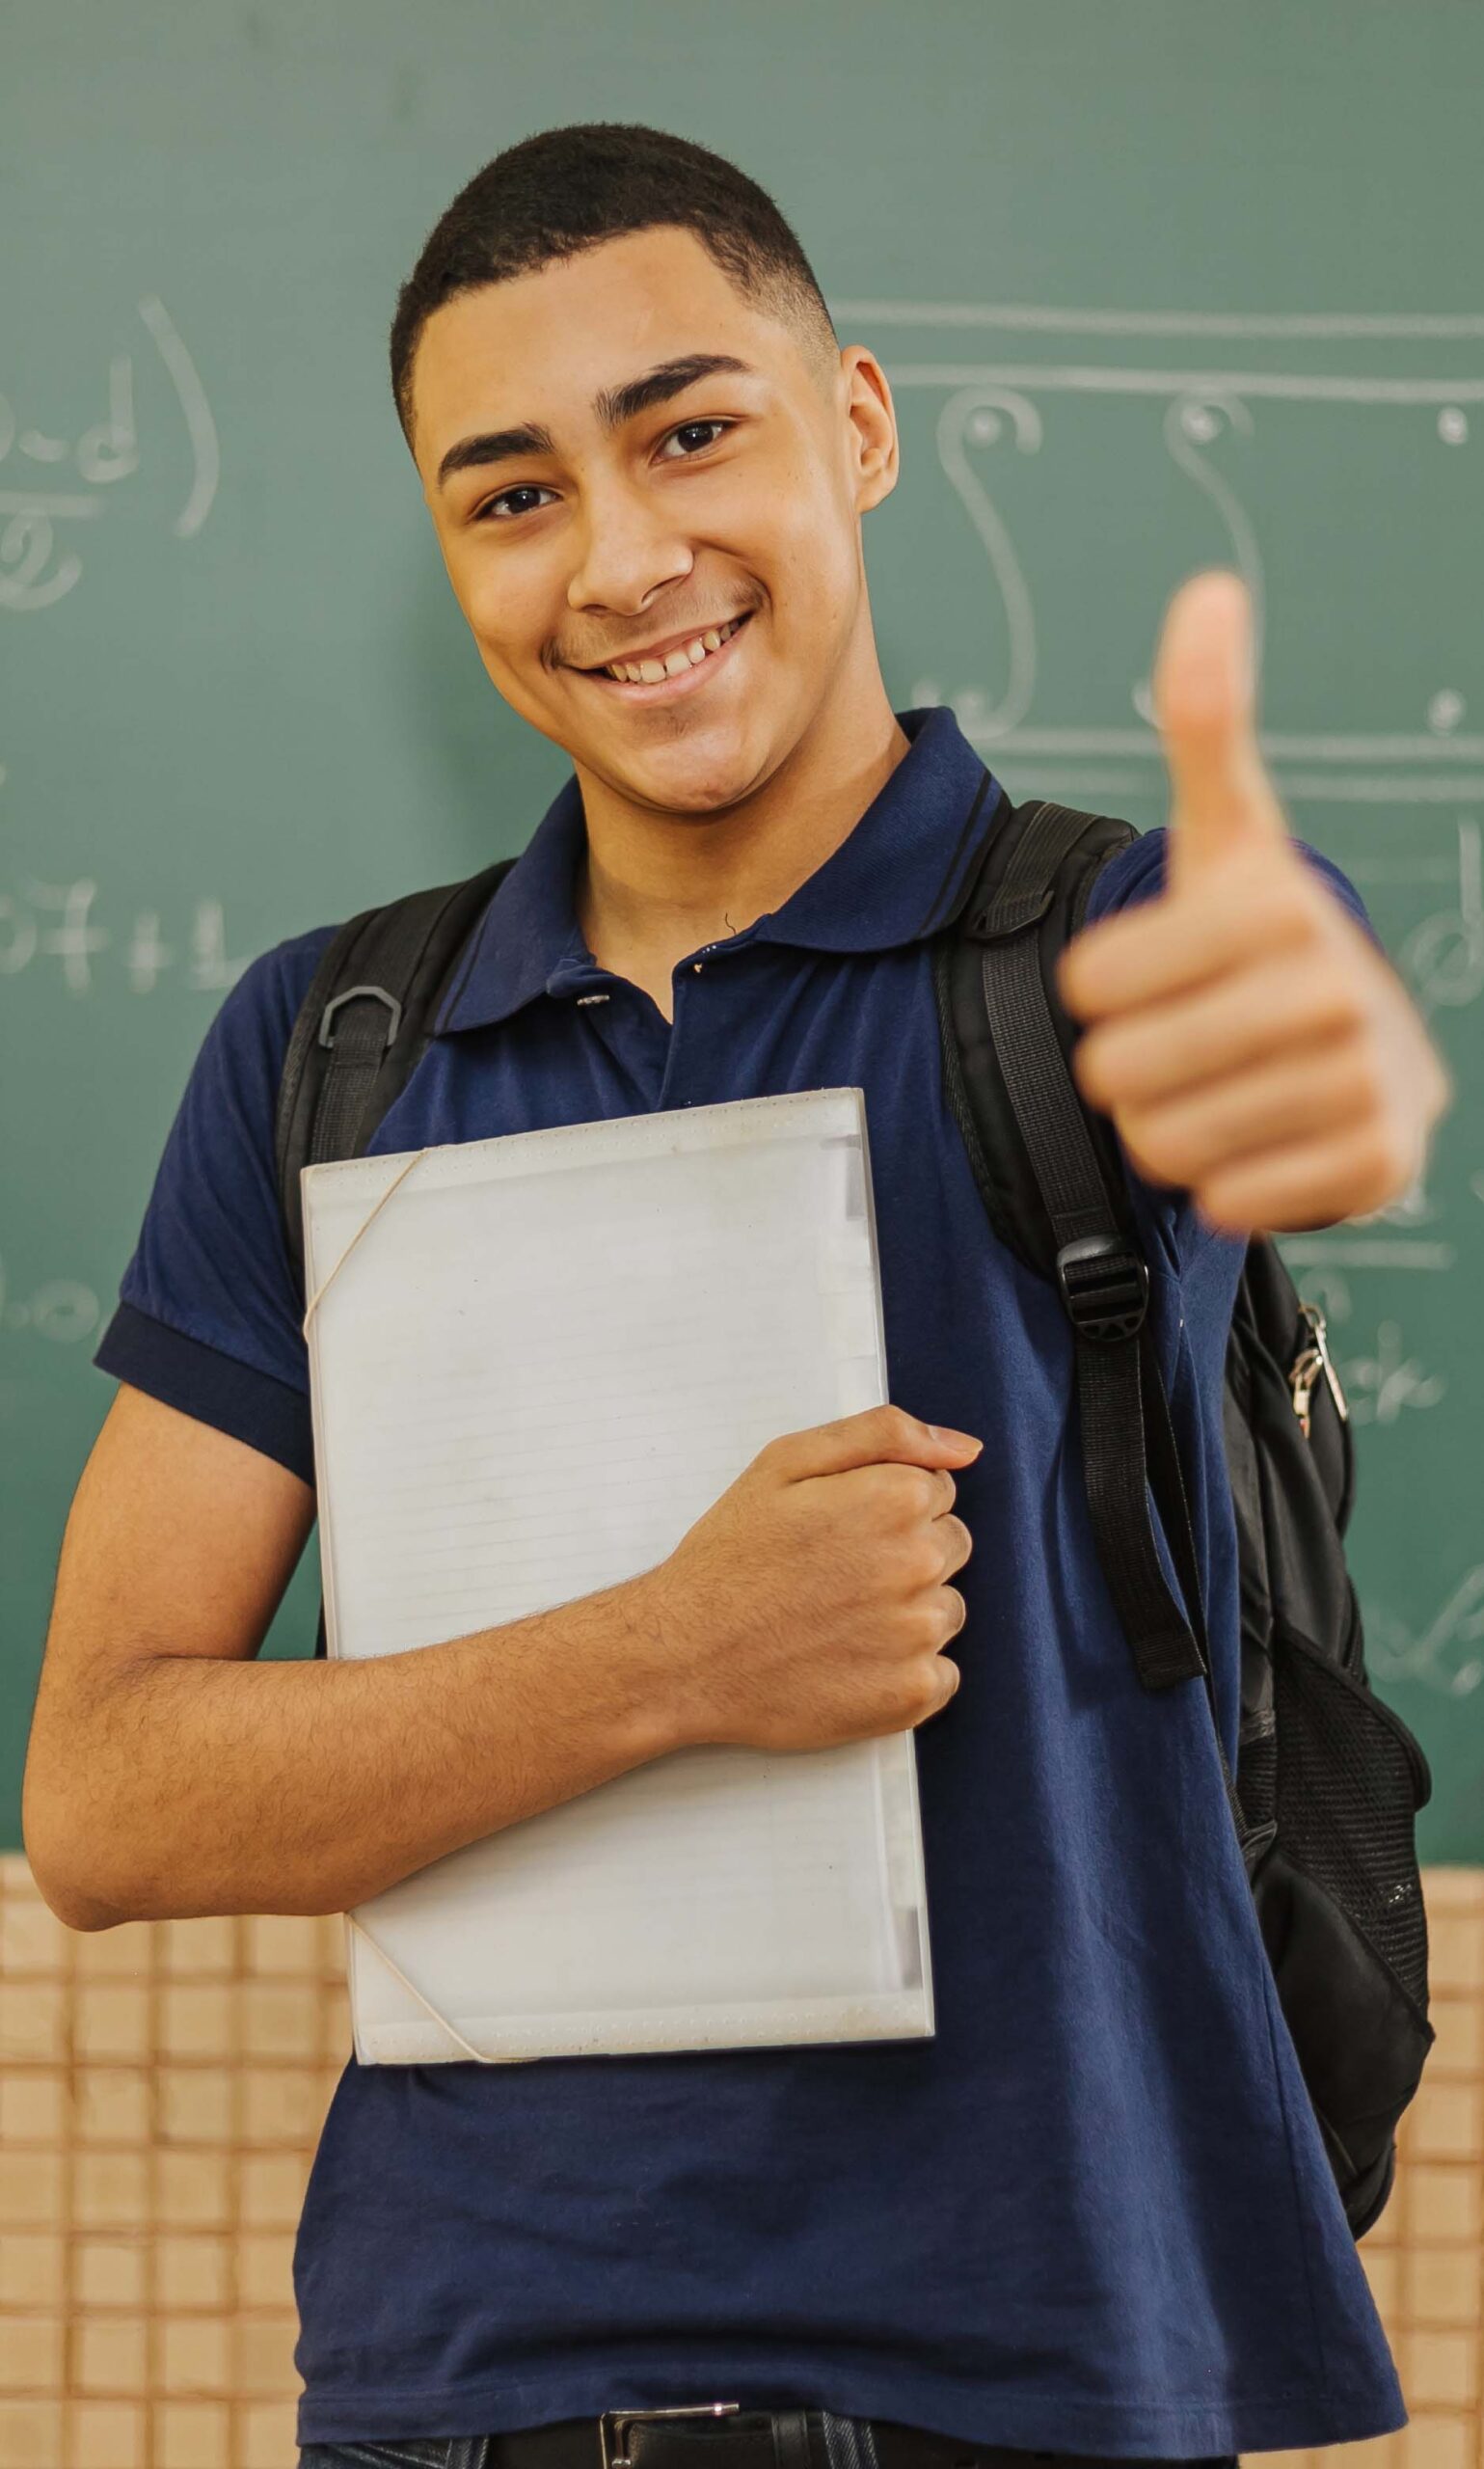 Latin men student smiling wearing backpack holding a notebook in a classroom with Thumbs up